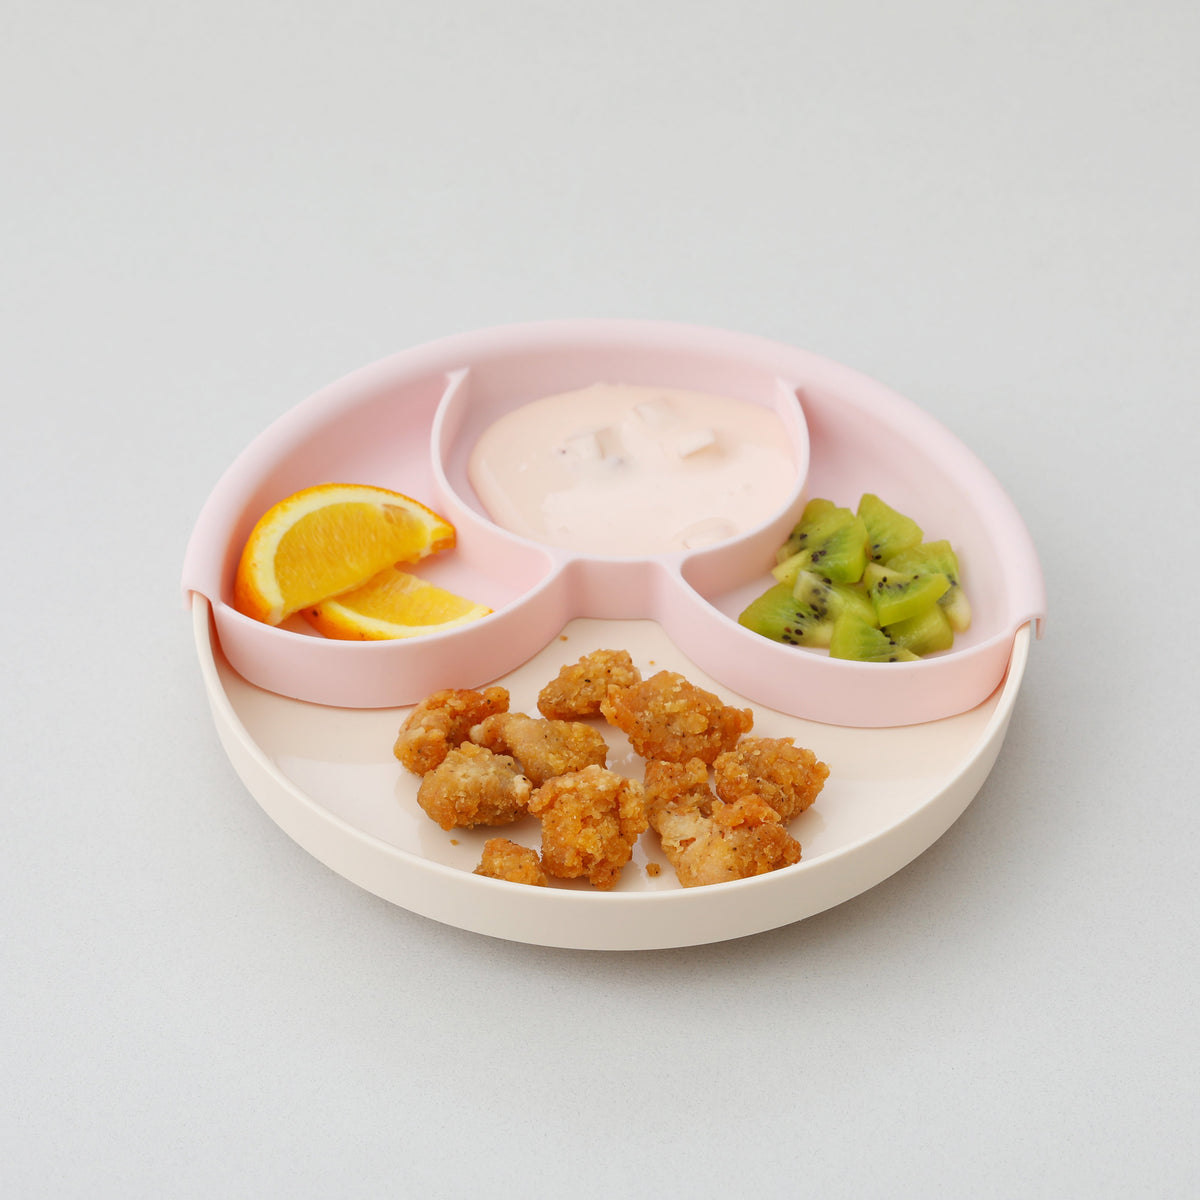 miniware-healthy-meal-set-pla-smart-divider-suction-plate-in-vanilla-silicone-divider-in-aqua- (5)